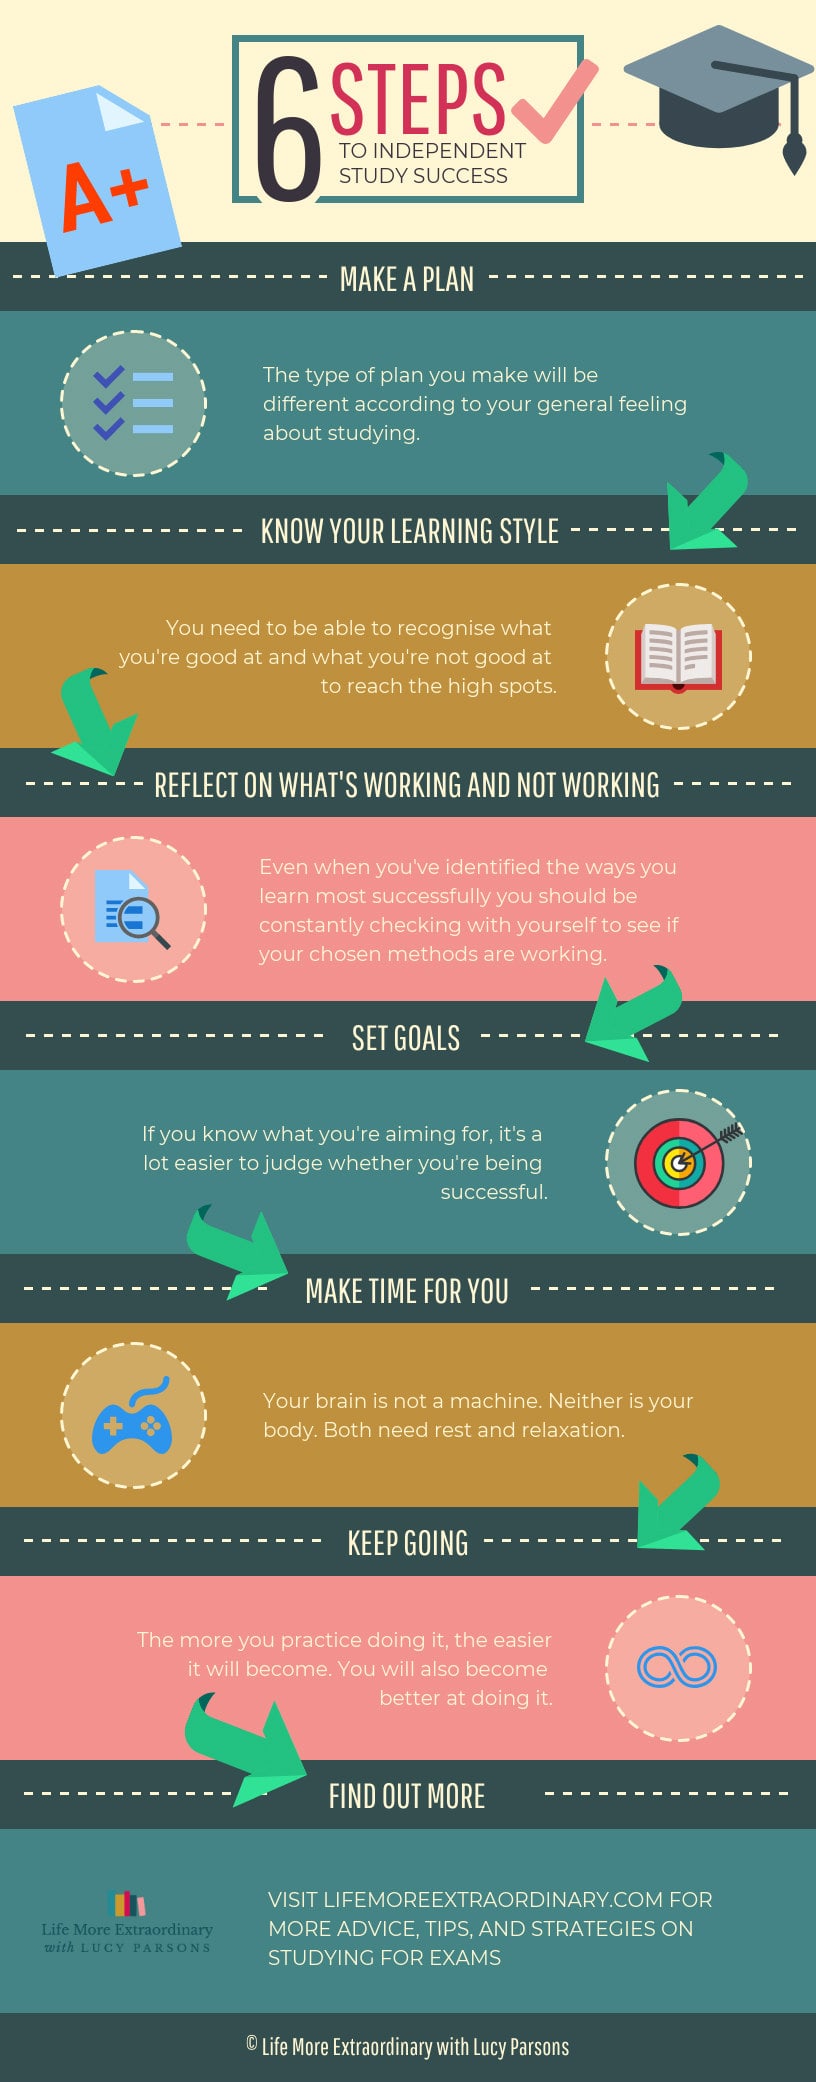 How to study independently infographic #studyskills #exams #students